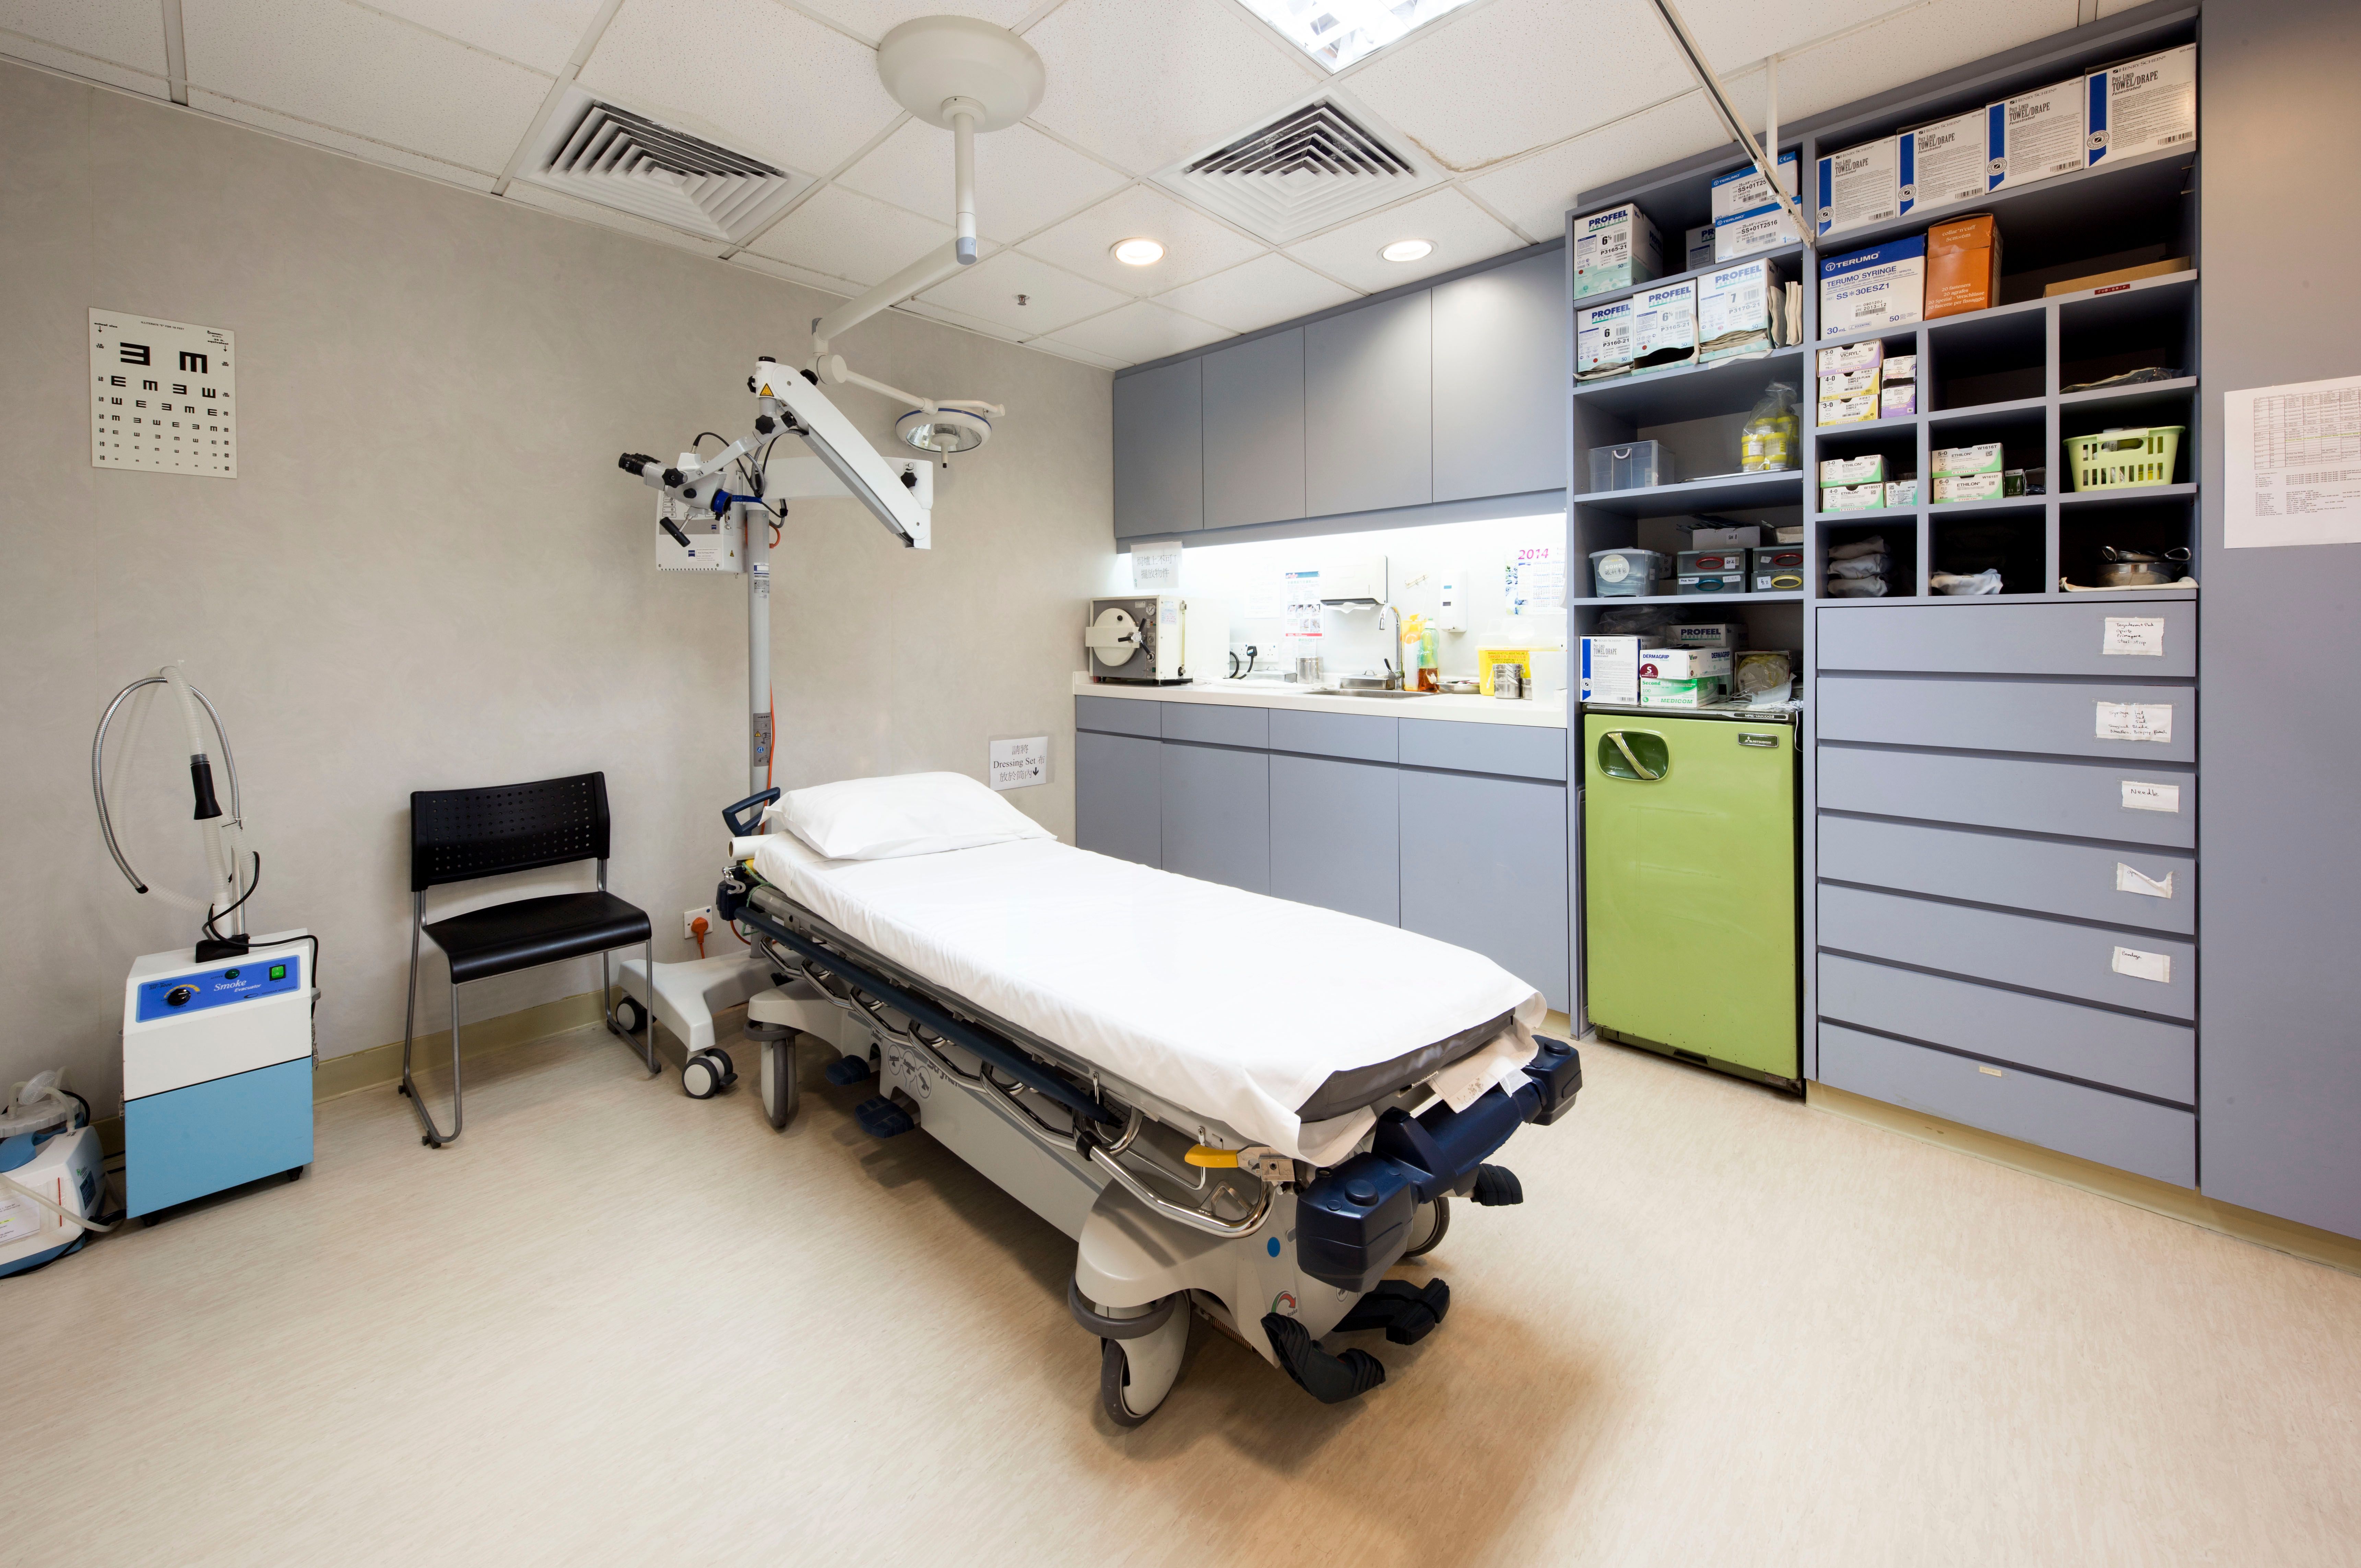 Procedure room with patient bed and storage cabinets